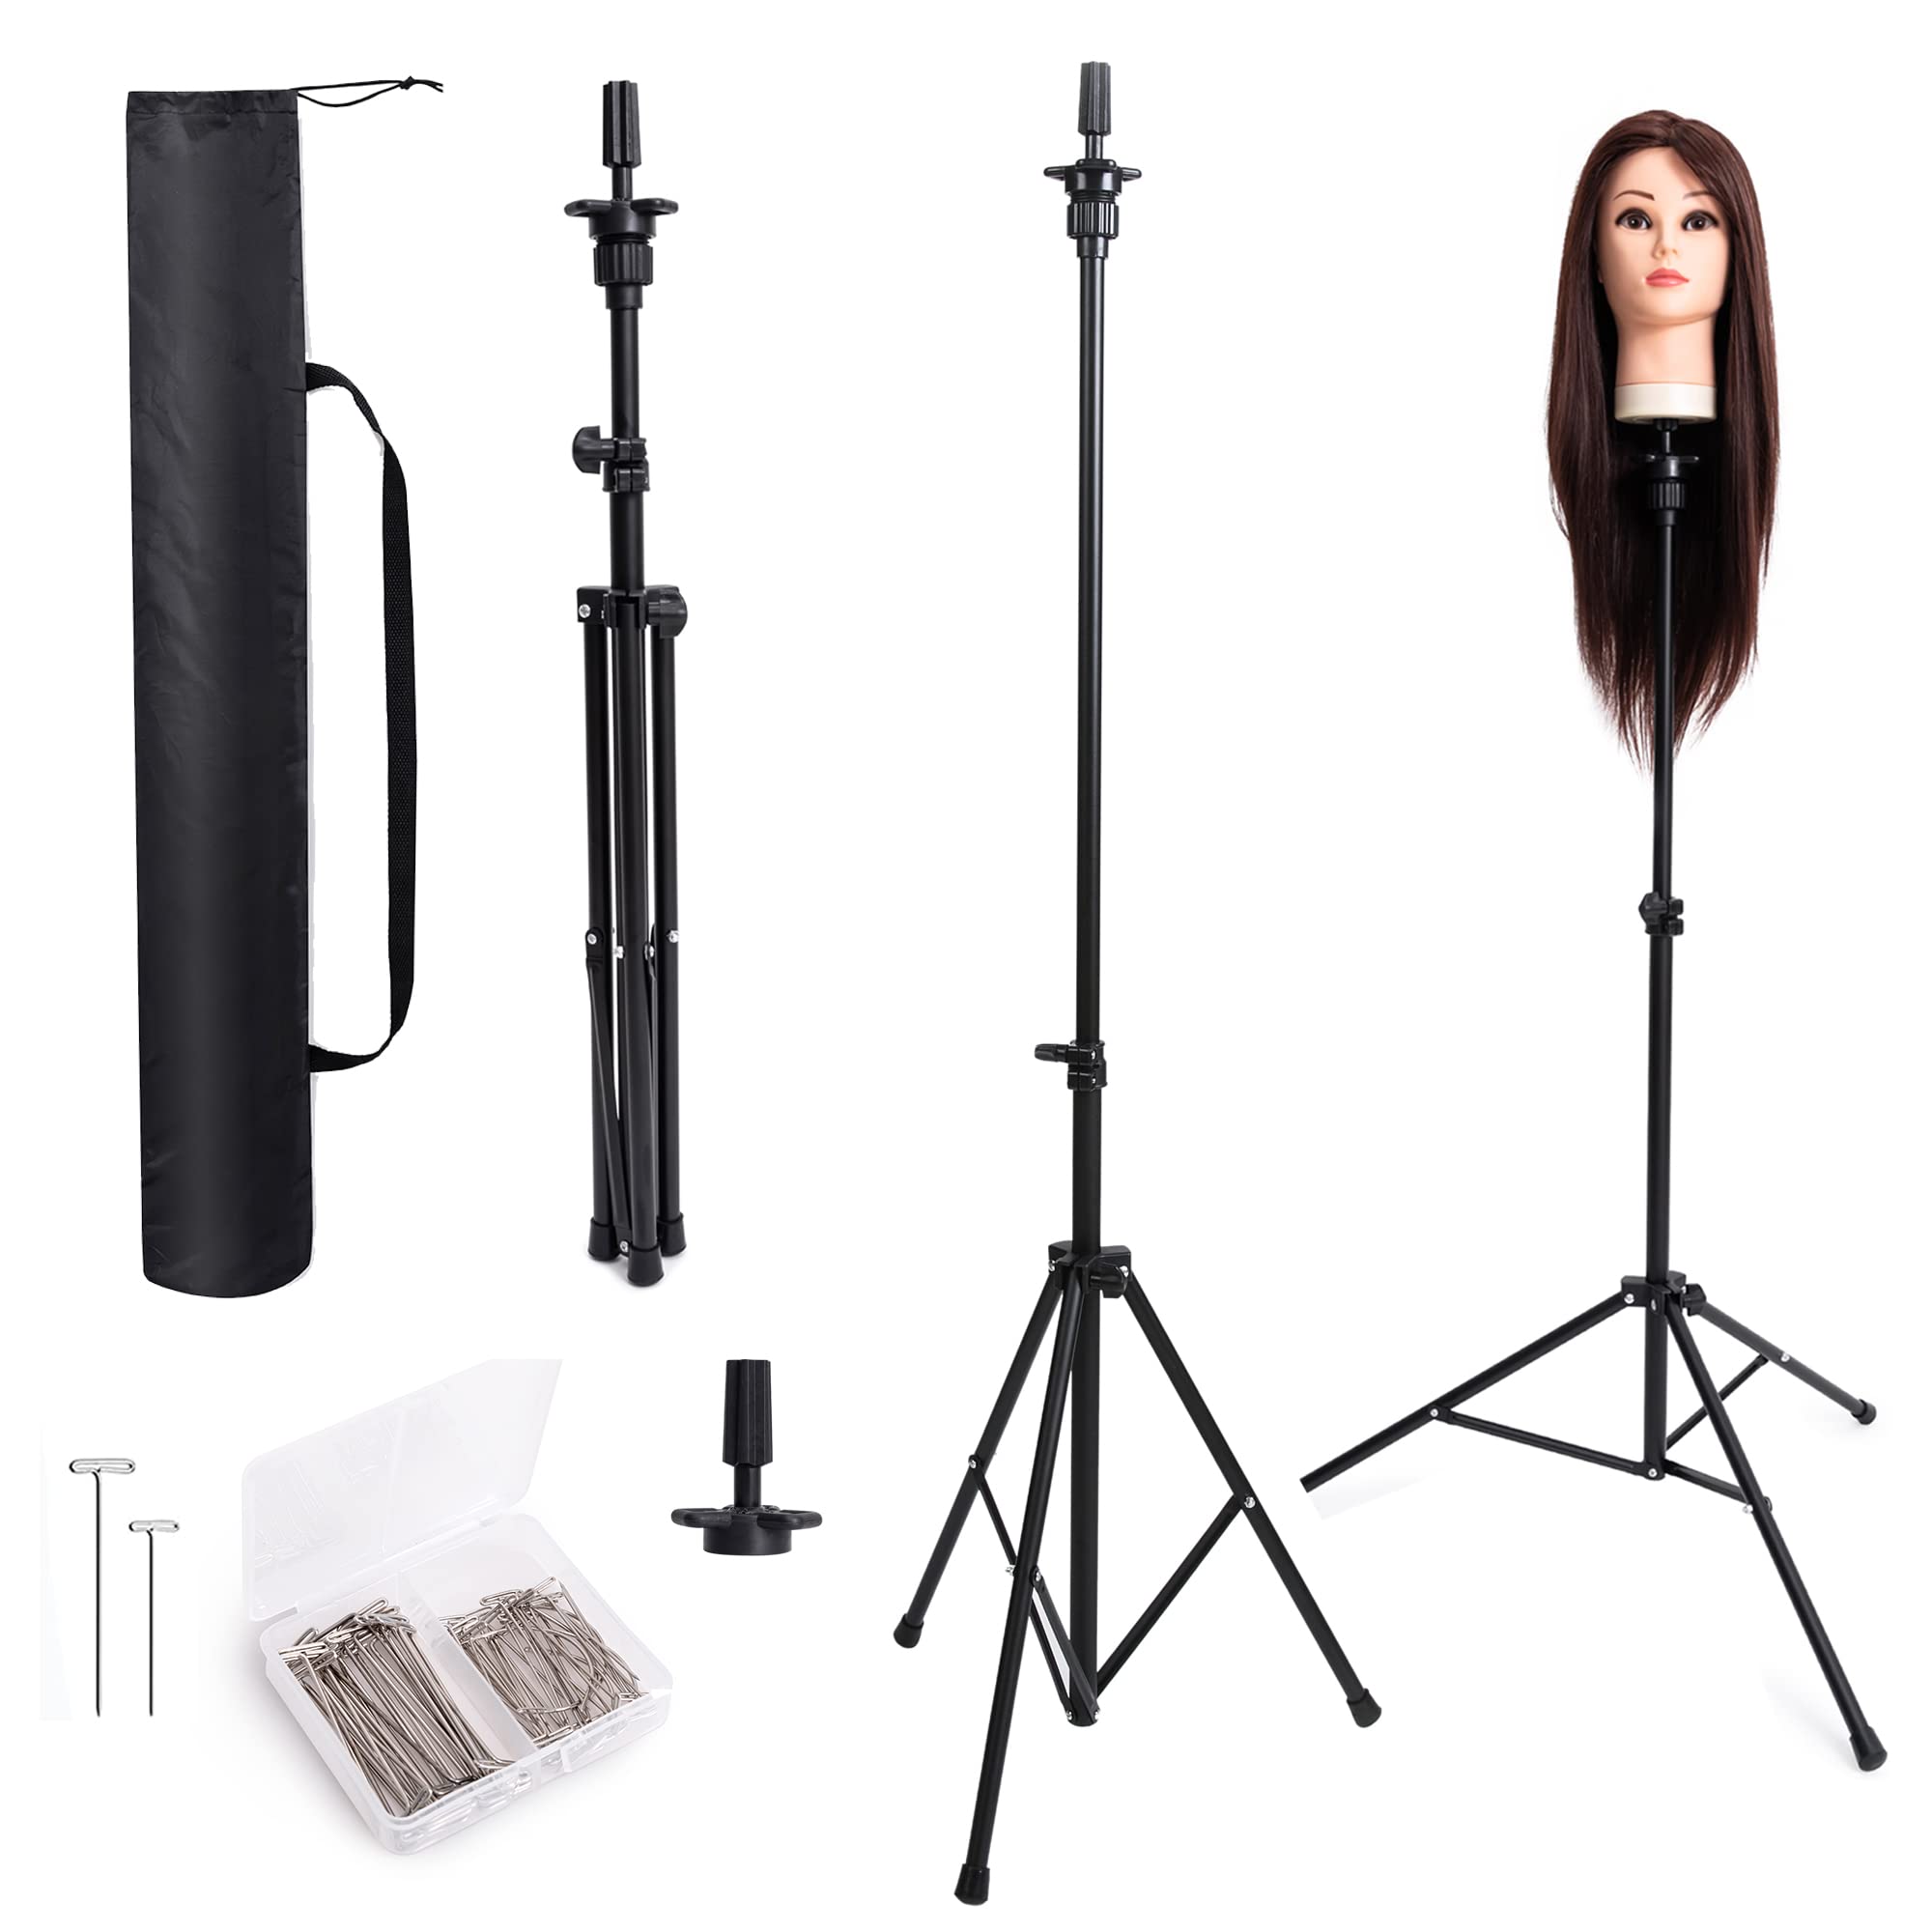 Goodofferplace GOODOFFER PLACE Wig Head Stand Metal Mannequin Head Tripod  Stand Adjustable with Carrying Bag,30pcs T-PIN for Maniquins Head Manikin